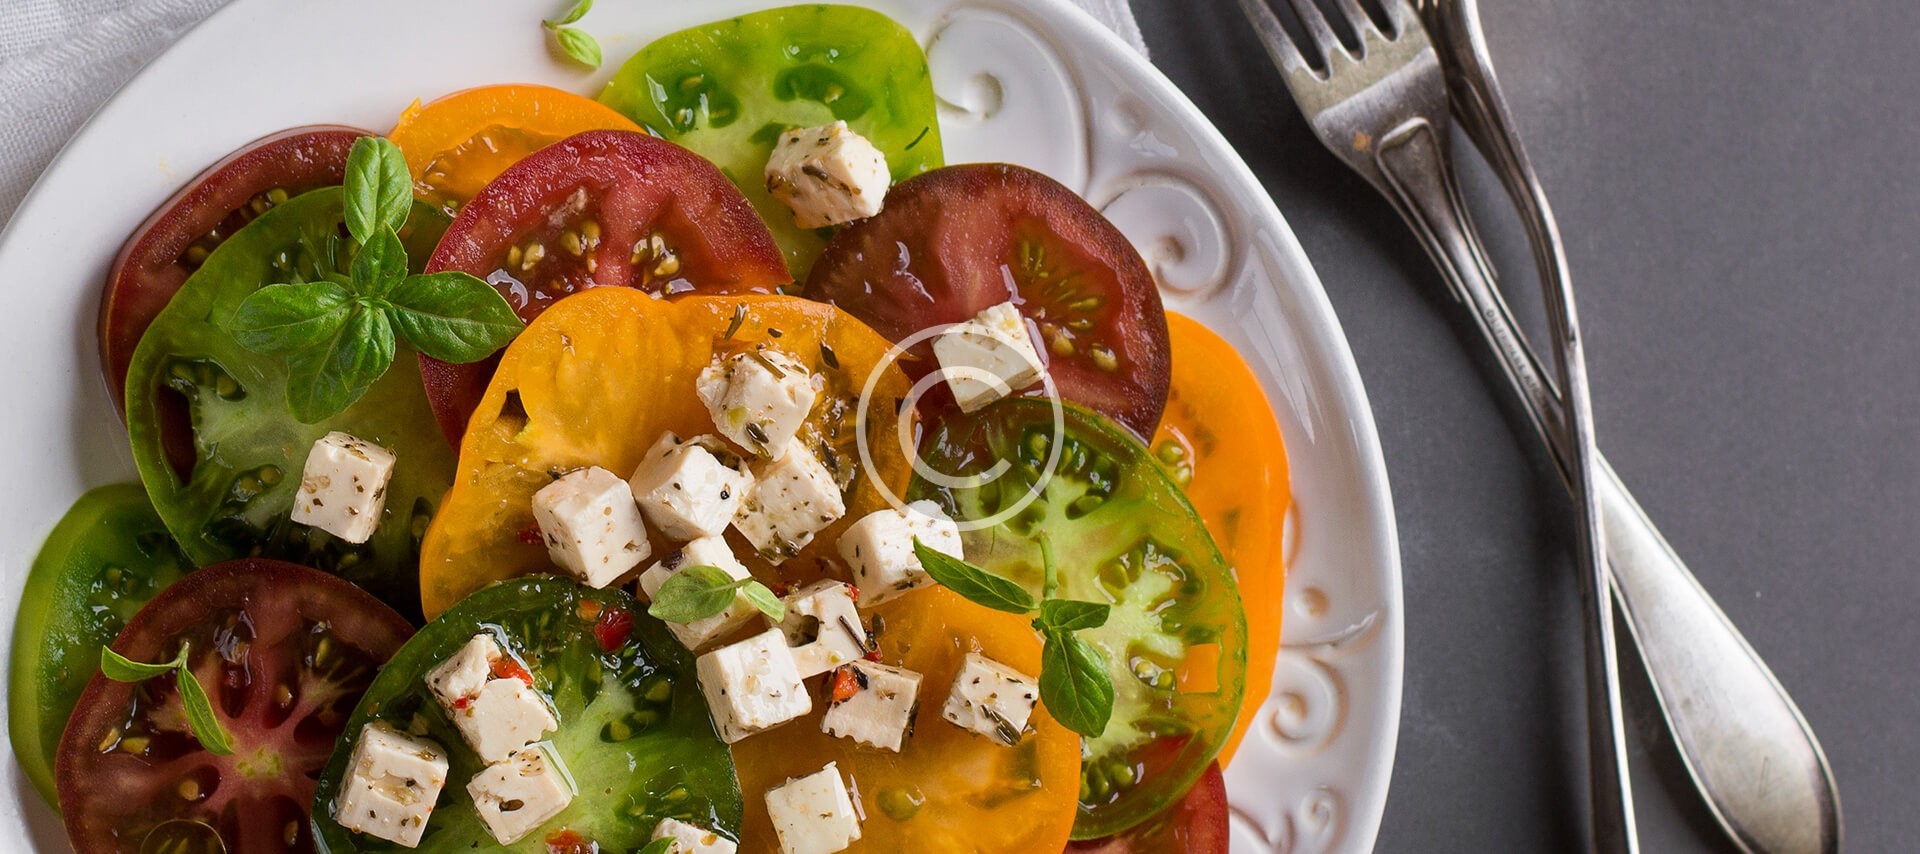 Tomato Salad with Balsamic Dressing